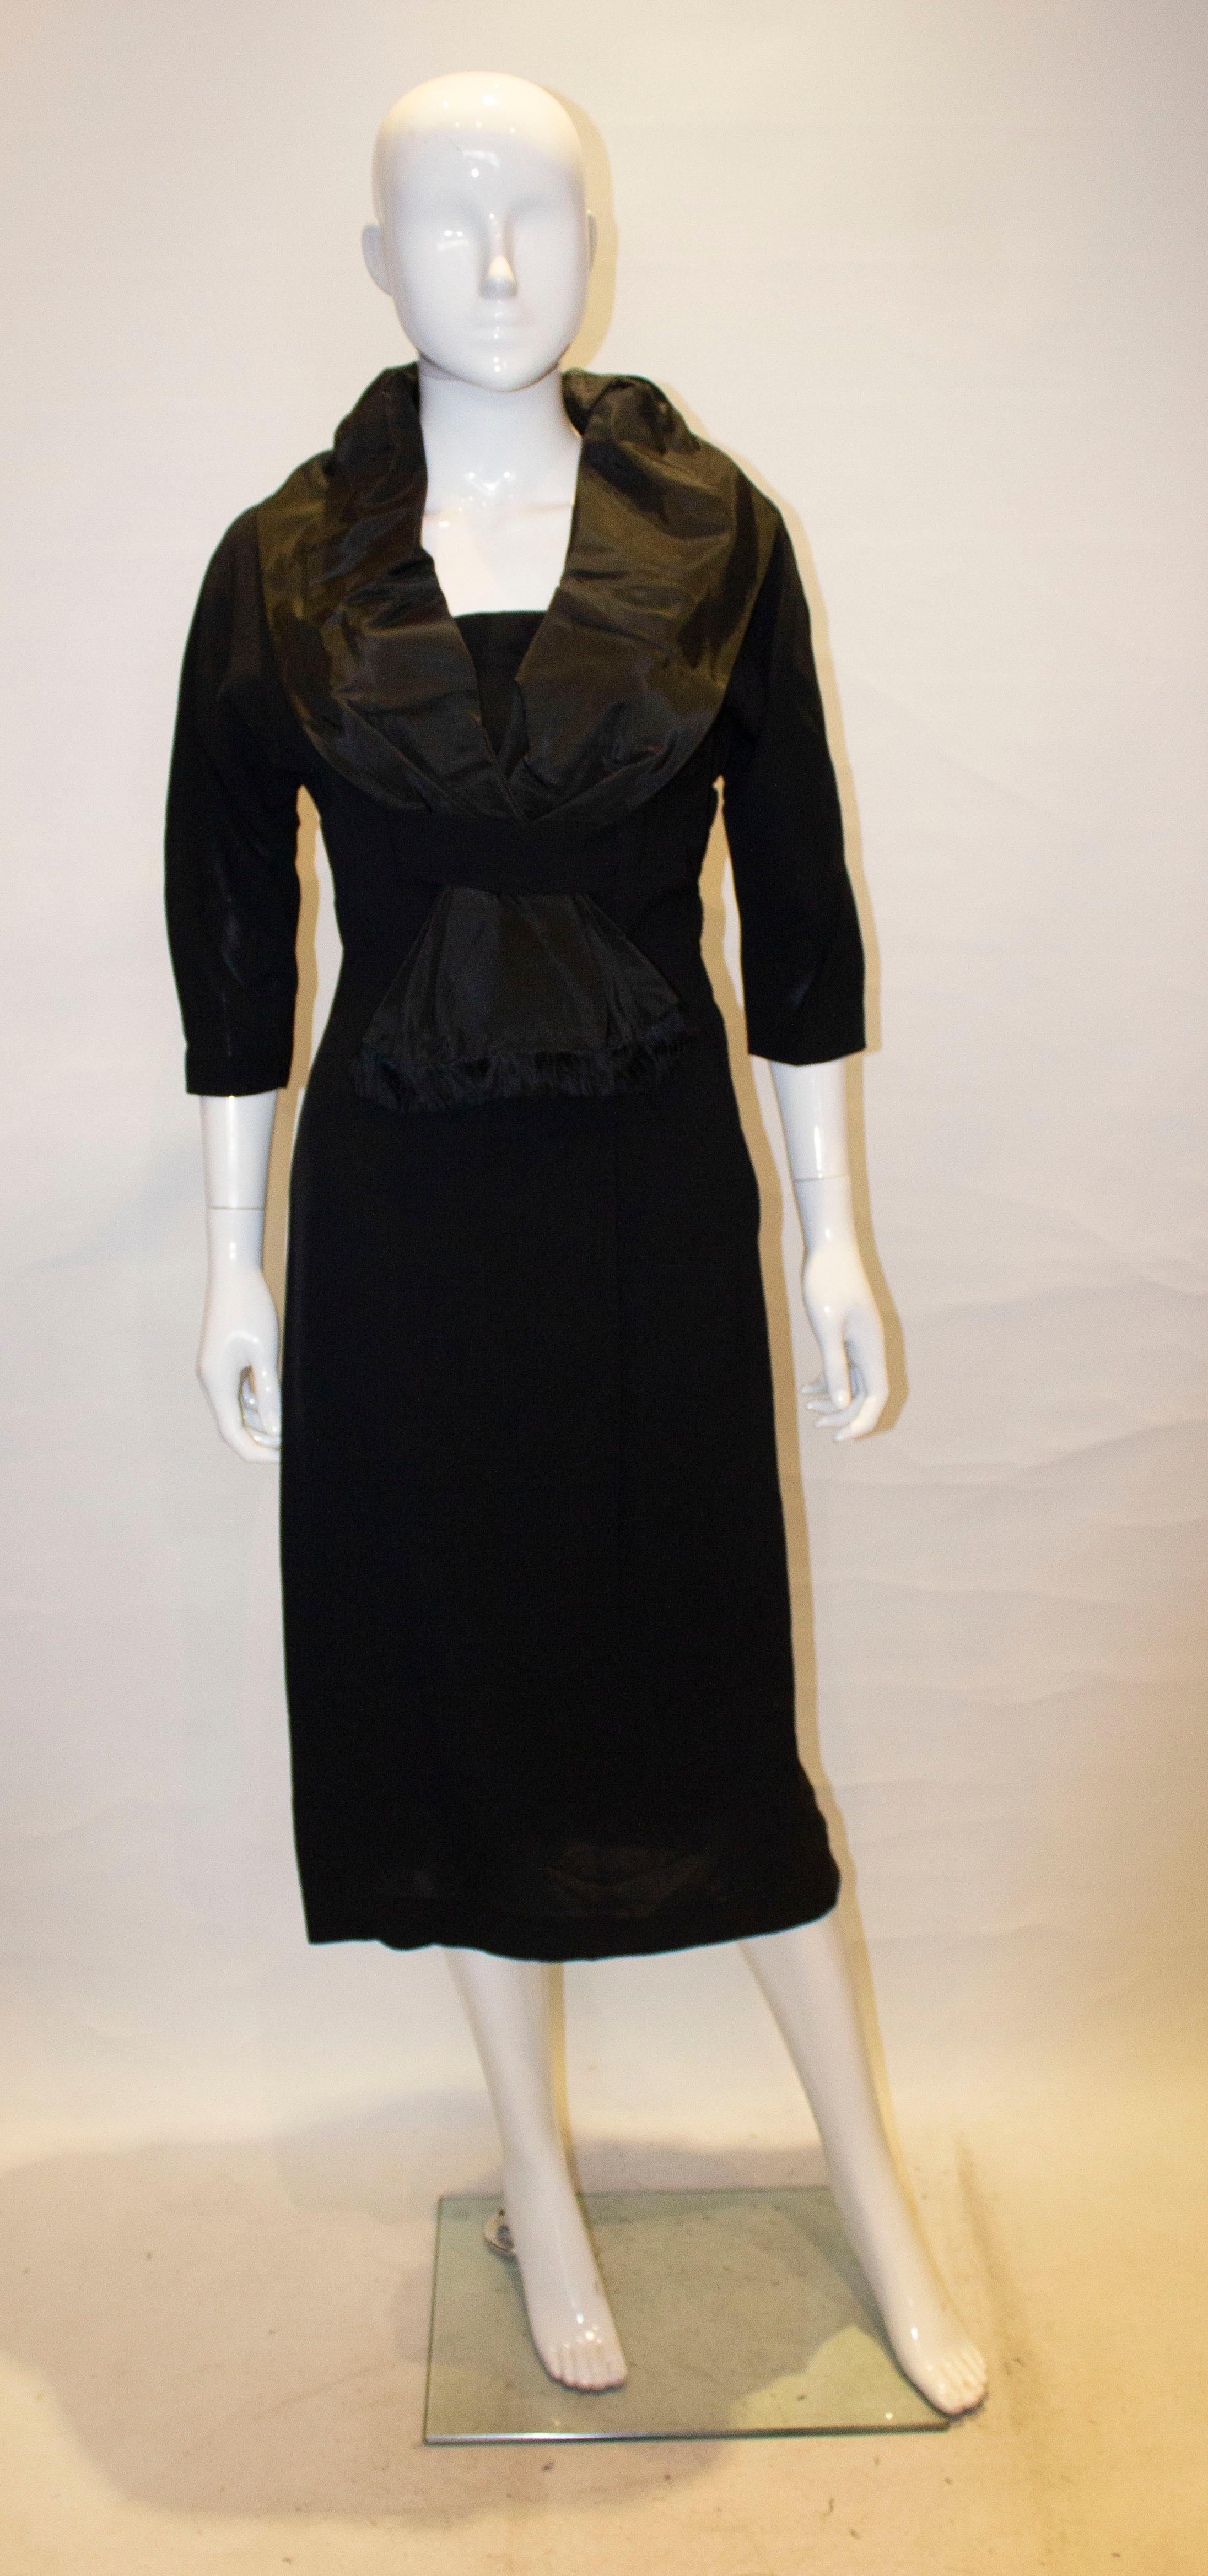 A chic vintage dinner /cocktail dress. The dress has a black taffetta shawl like, shawl collar with fringing, a side zip opening, elbow length sleaves and is fully lined.